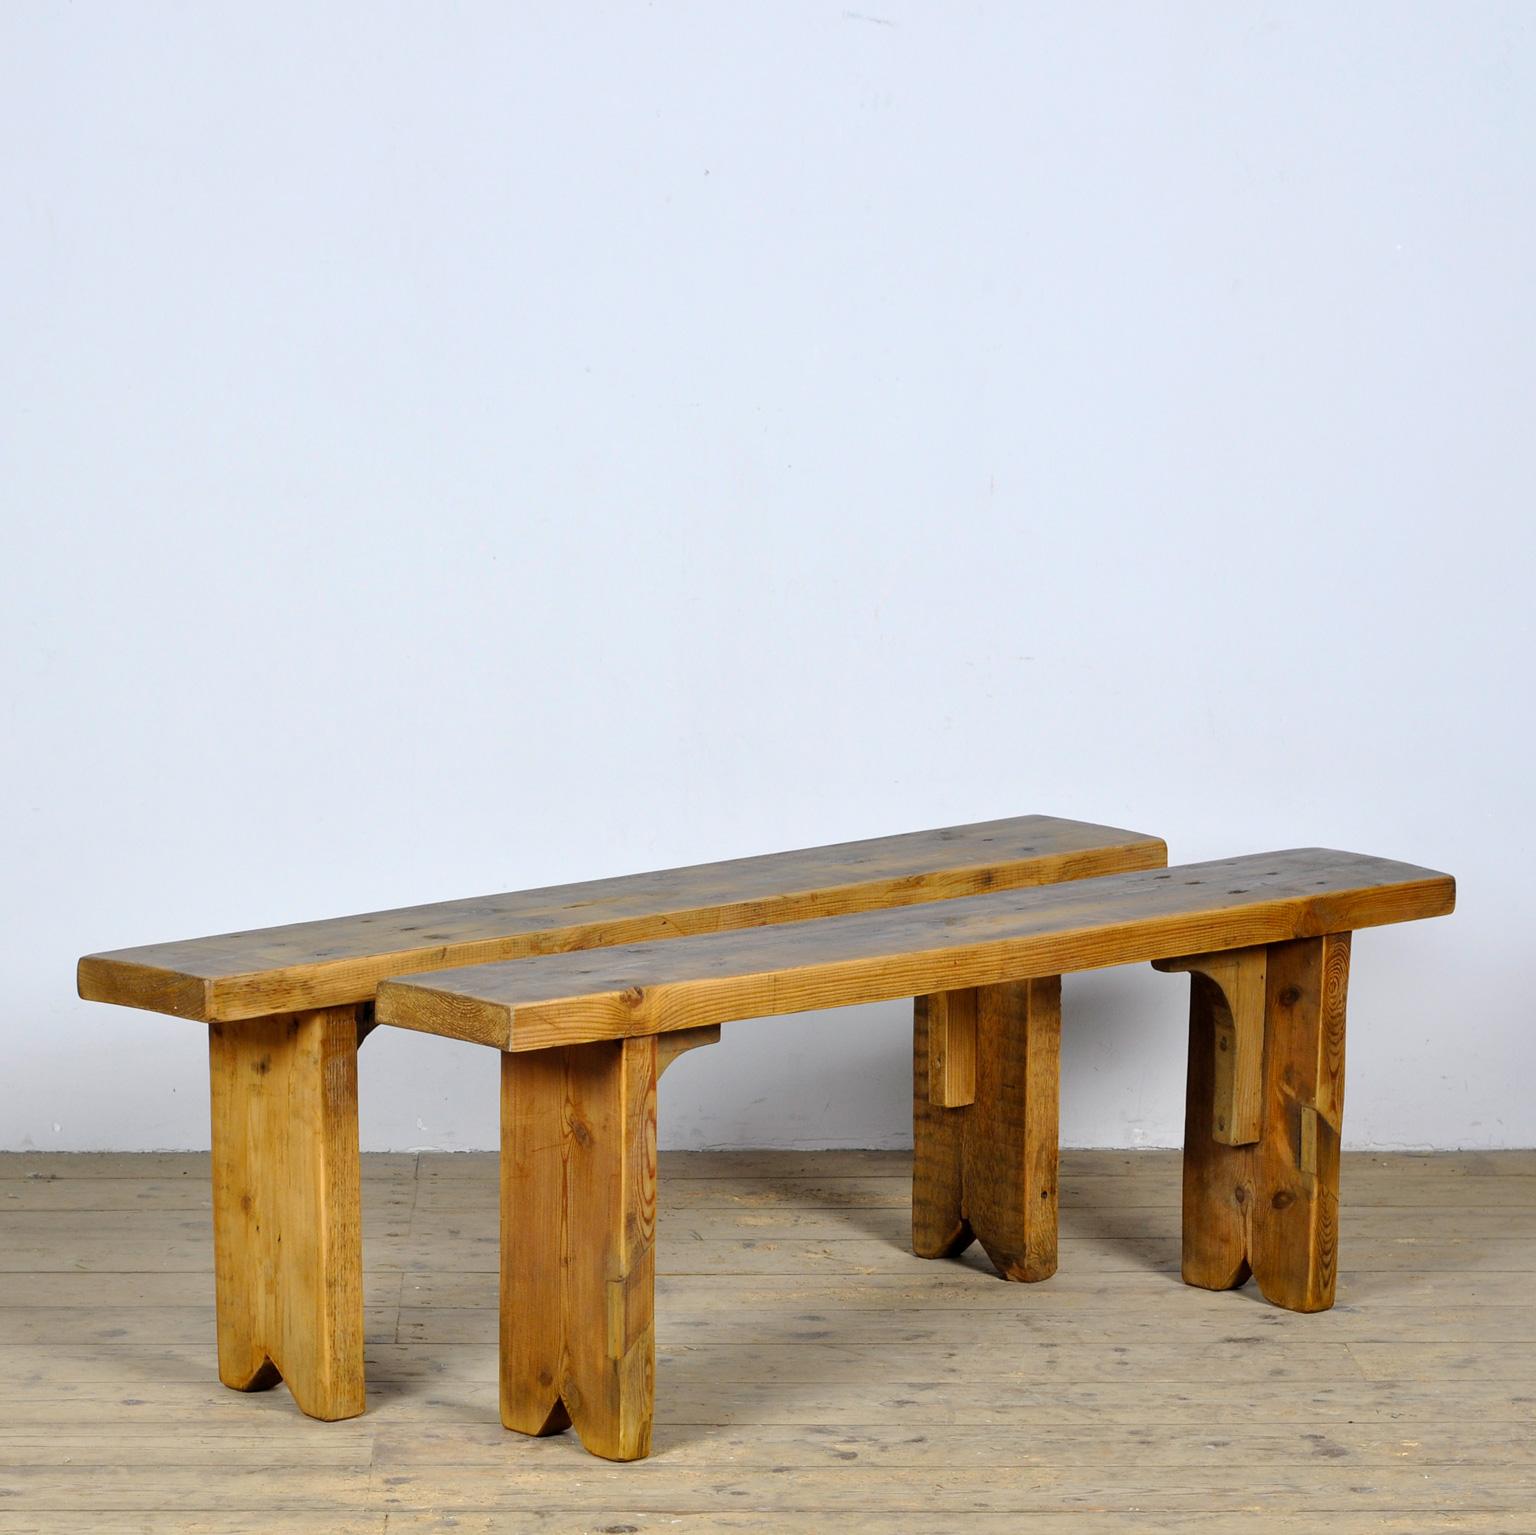 Set of pine benches, circa 1960. The benches were made in a simple but elegant manner.